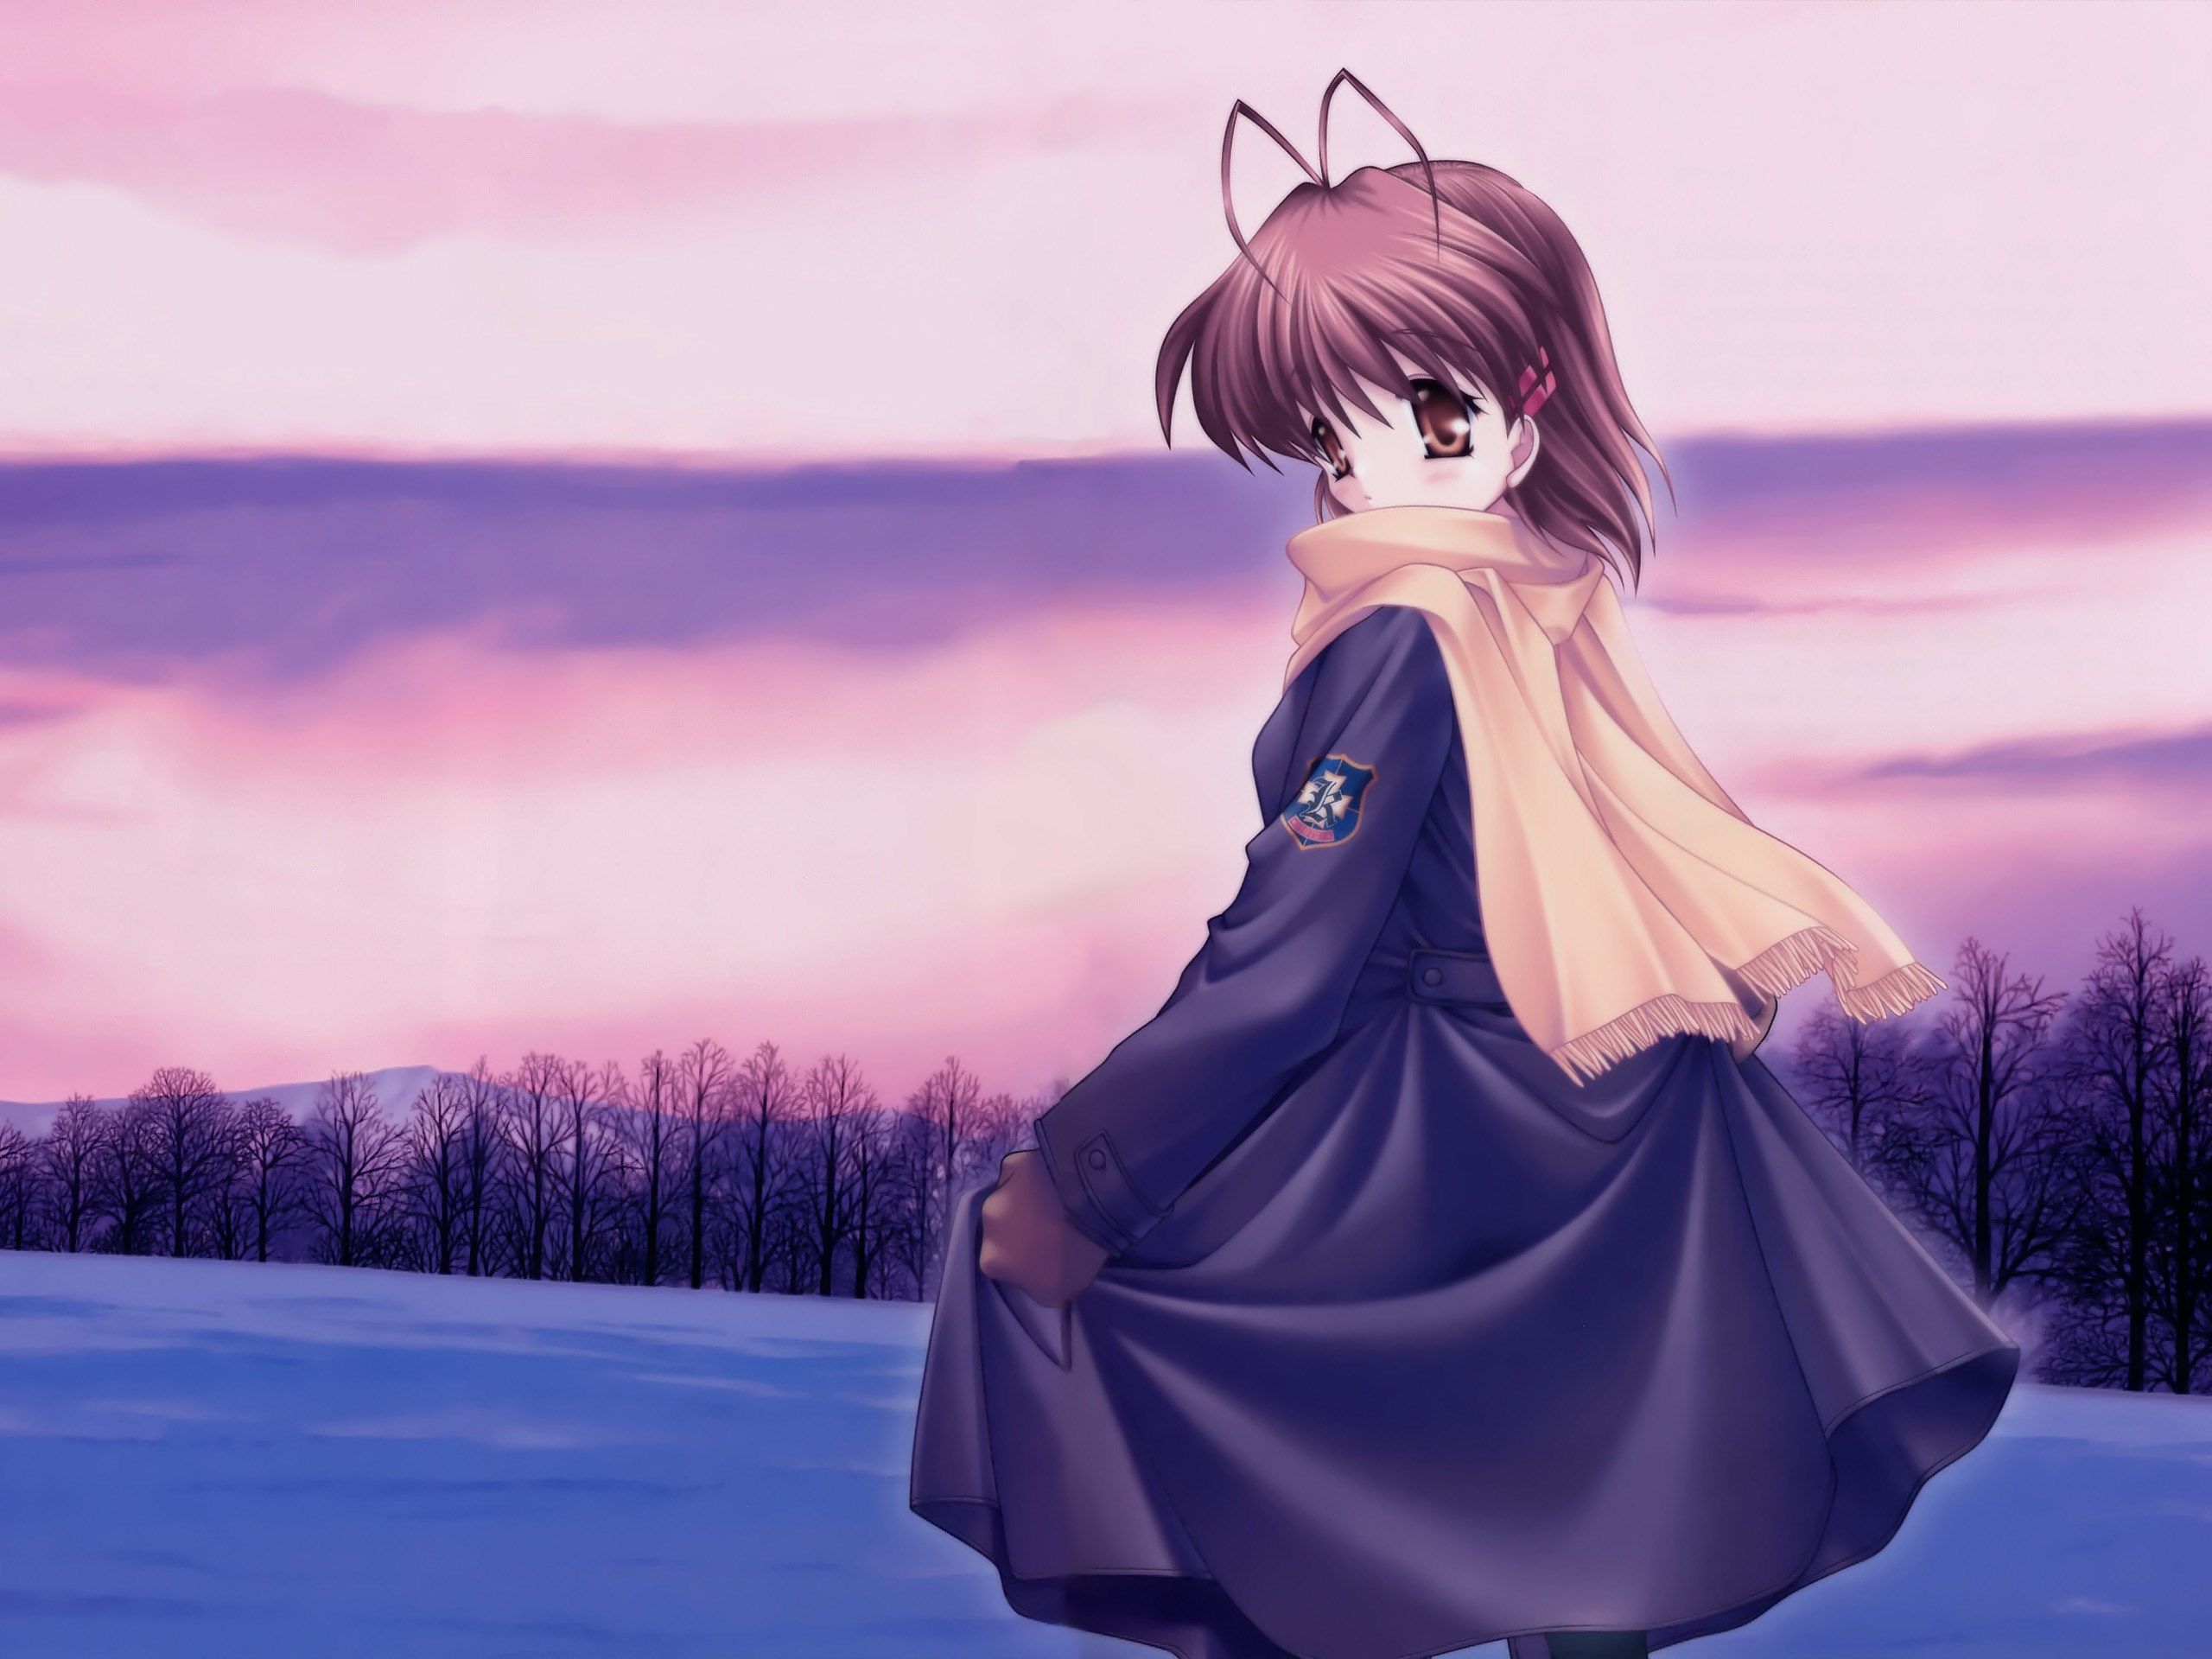 Sunset Winter Anime Wallpapers - Wallpaper Cave